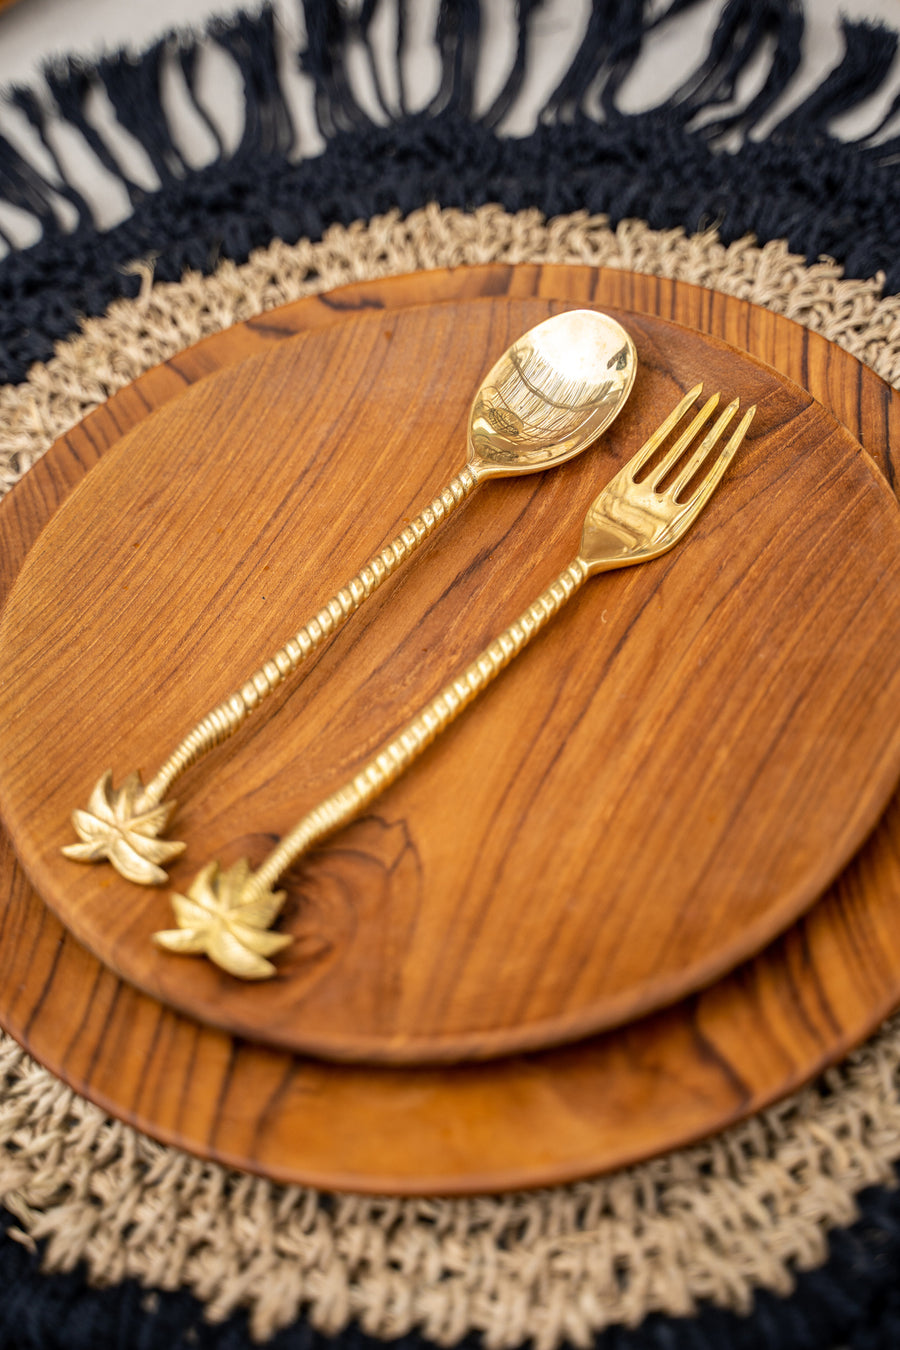 The Palm Tree Spoon - Gold